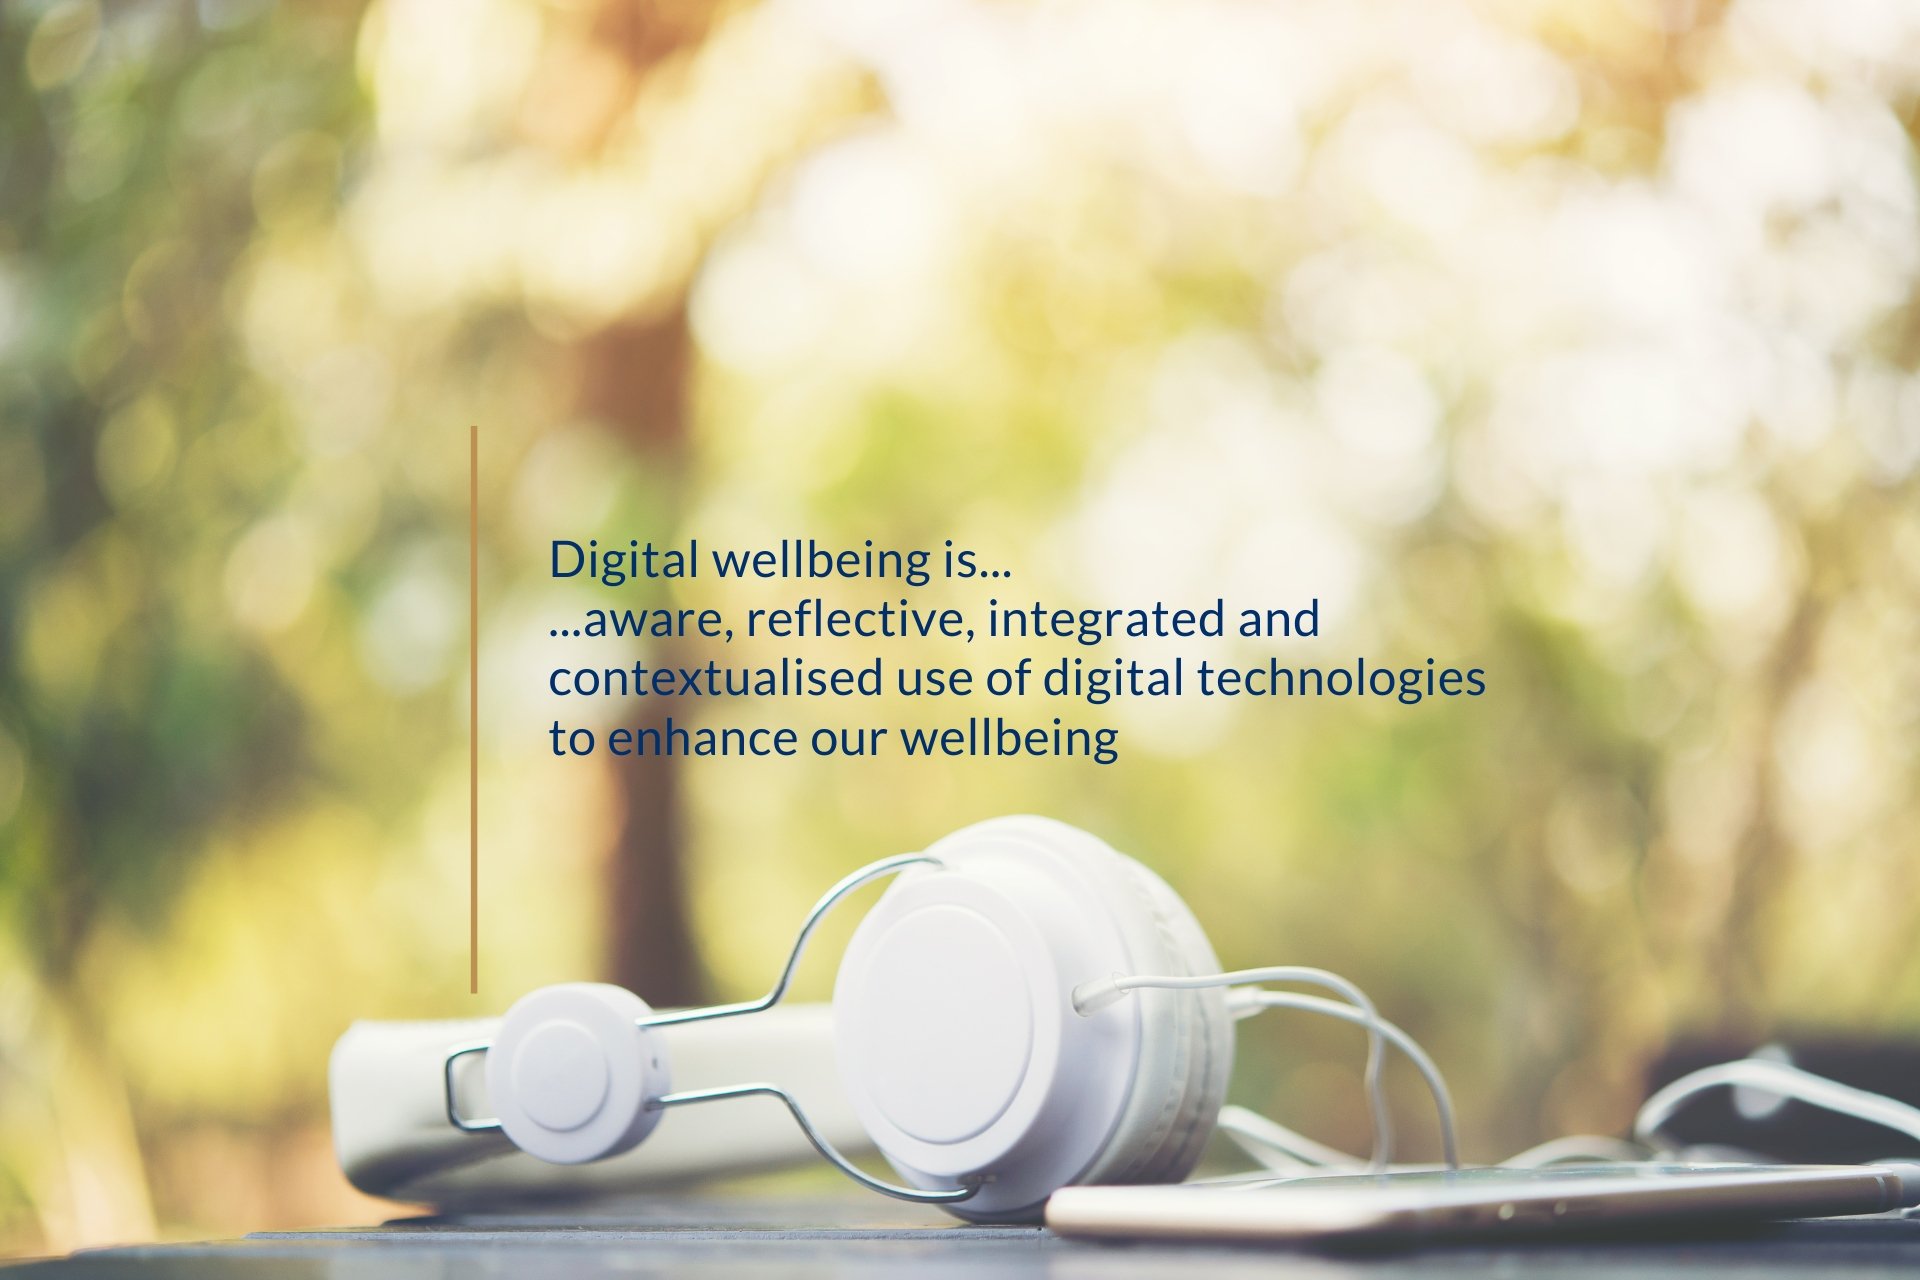 What is digital wellbeing and what is it not